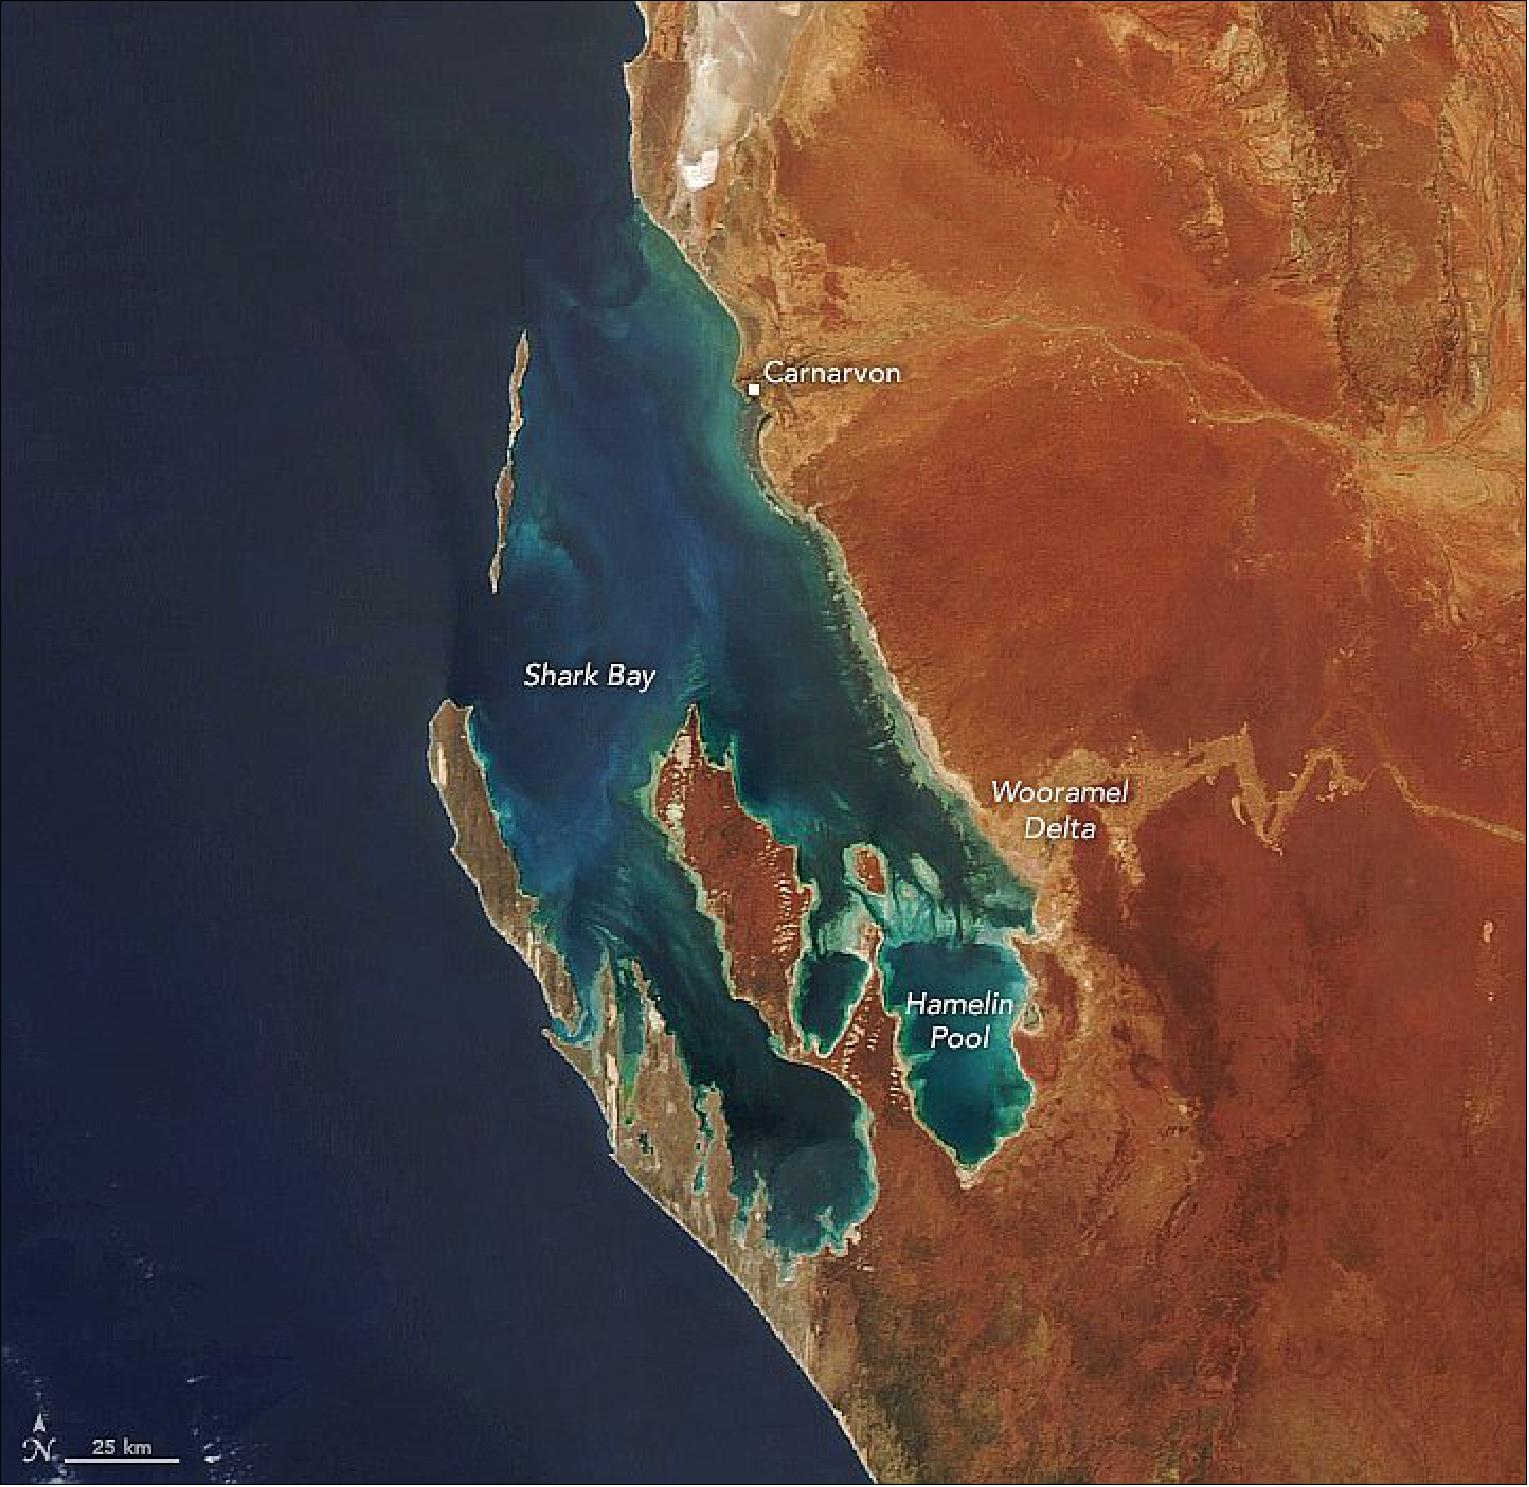 Figure 60: The MODIS instrument on NASA's Aqua satellite captured this natural-color image of the region on September 30, 2020. Shark Bay's waters, islands, and peninsulas cover more than 23,000 km2 (image credit: NASA Earth Observatory, image by Lauren Dauphin, using MODIS data from NASA EOSDIS/LANCE and GIBS/Worldview. Story by Kasha Patel)